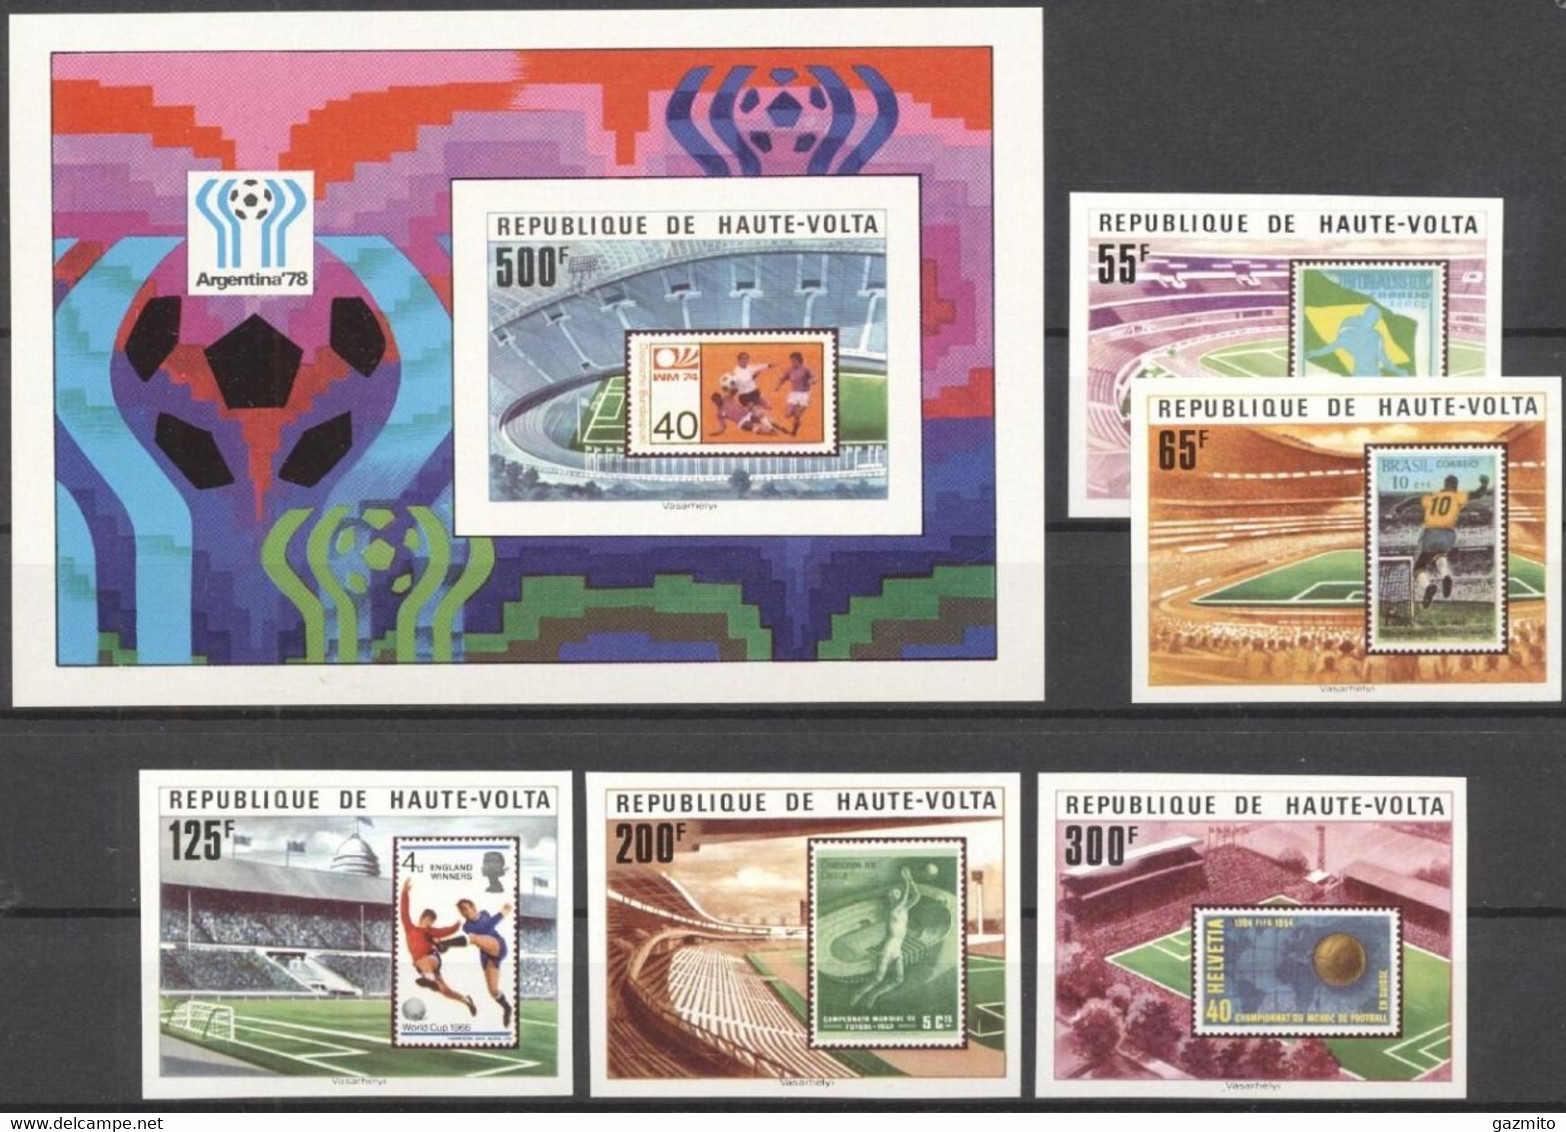 Haute Volta 1977, Football, Stamp On Stamp, 5val BF IMPERFORATED - Haute-Volta (1958-1984)